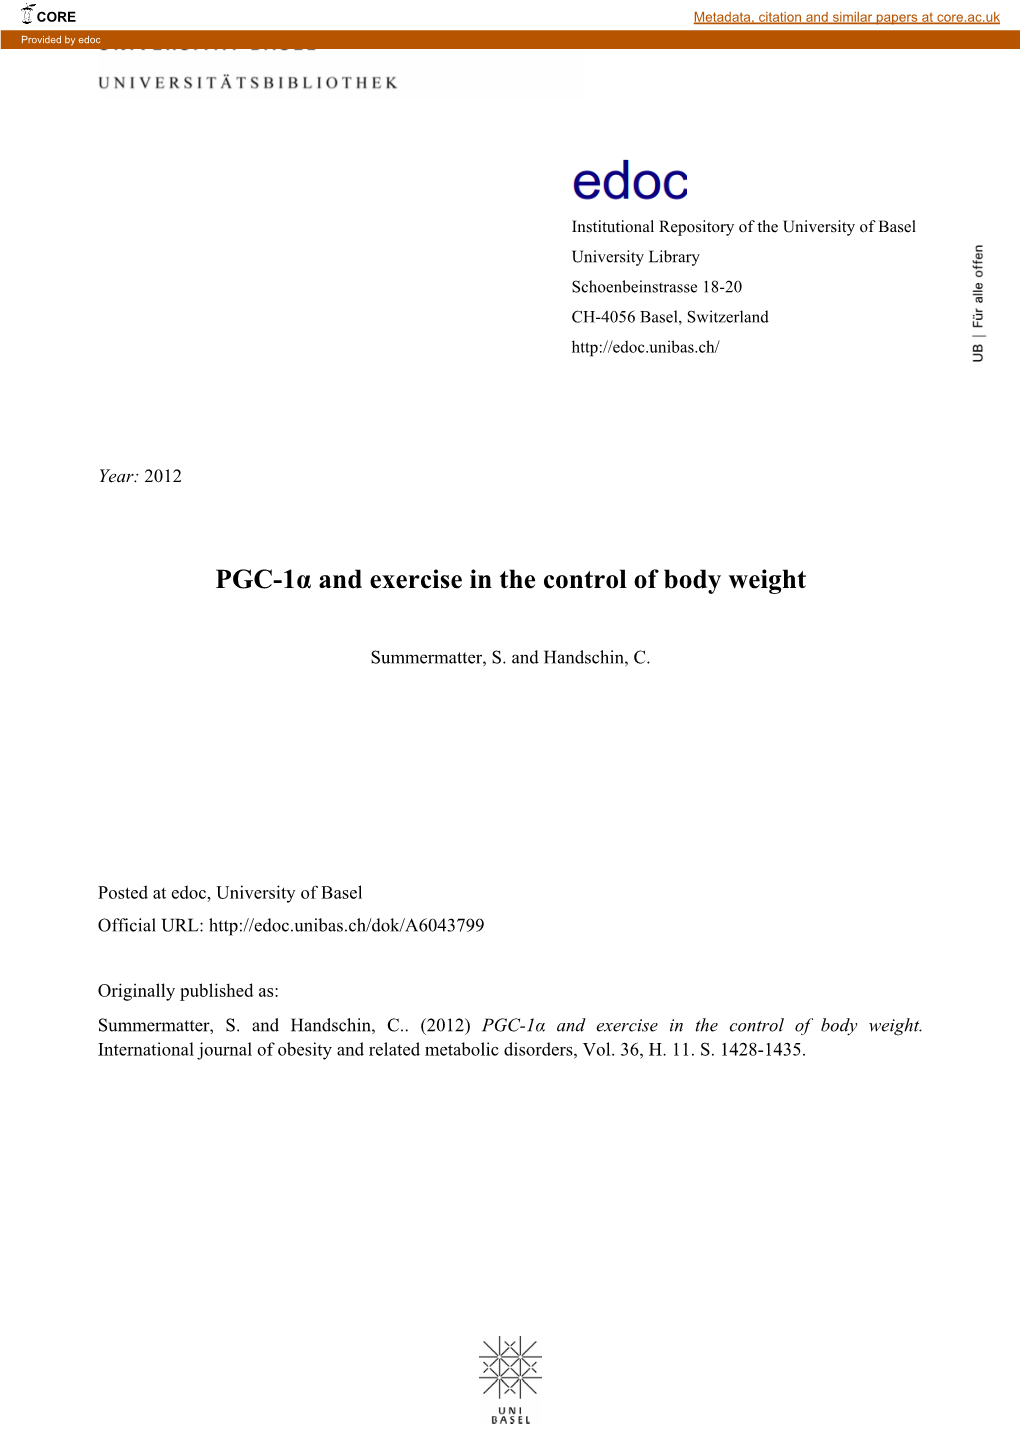 PGC-1Α and Exercise in the Control of Body Weight